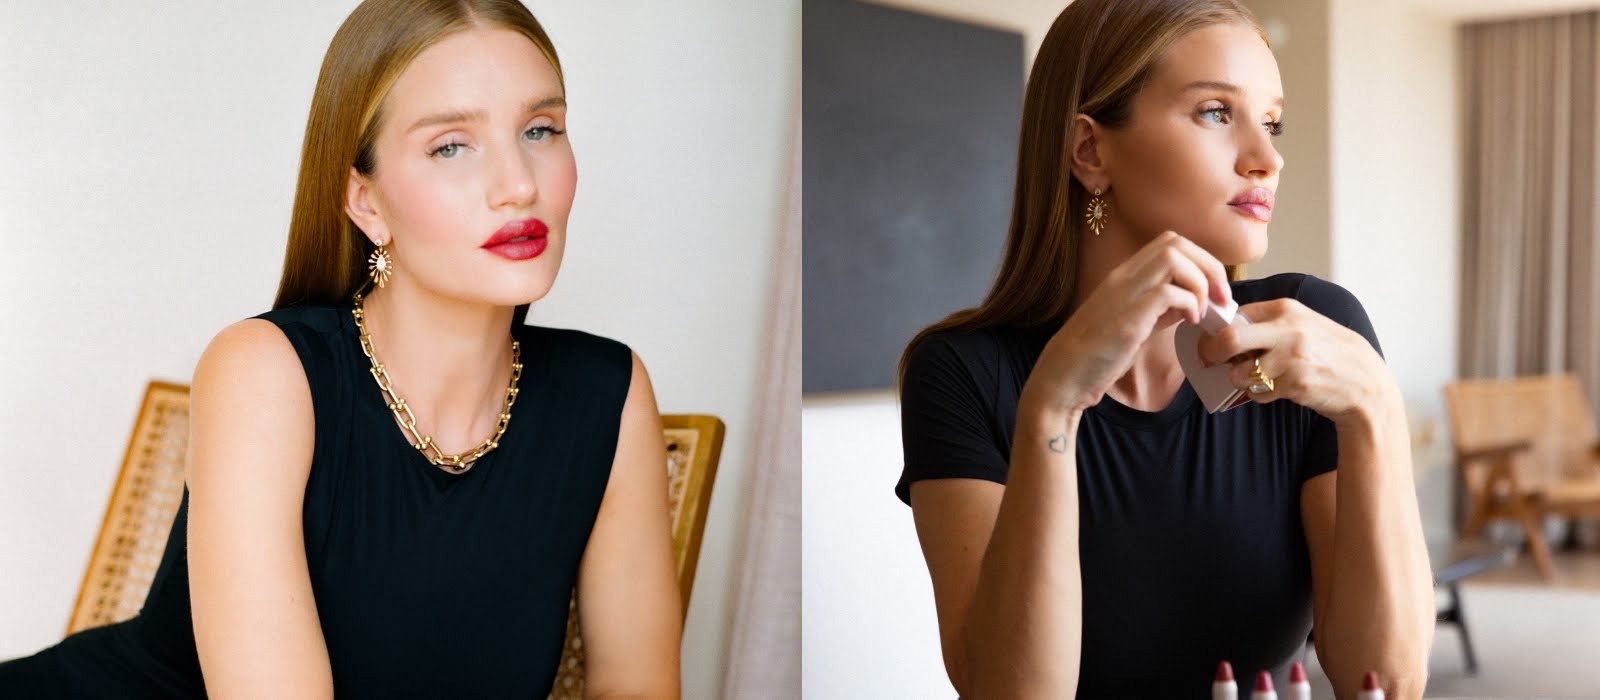 Rosie Huntington-Whiteley on her life in beauty